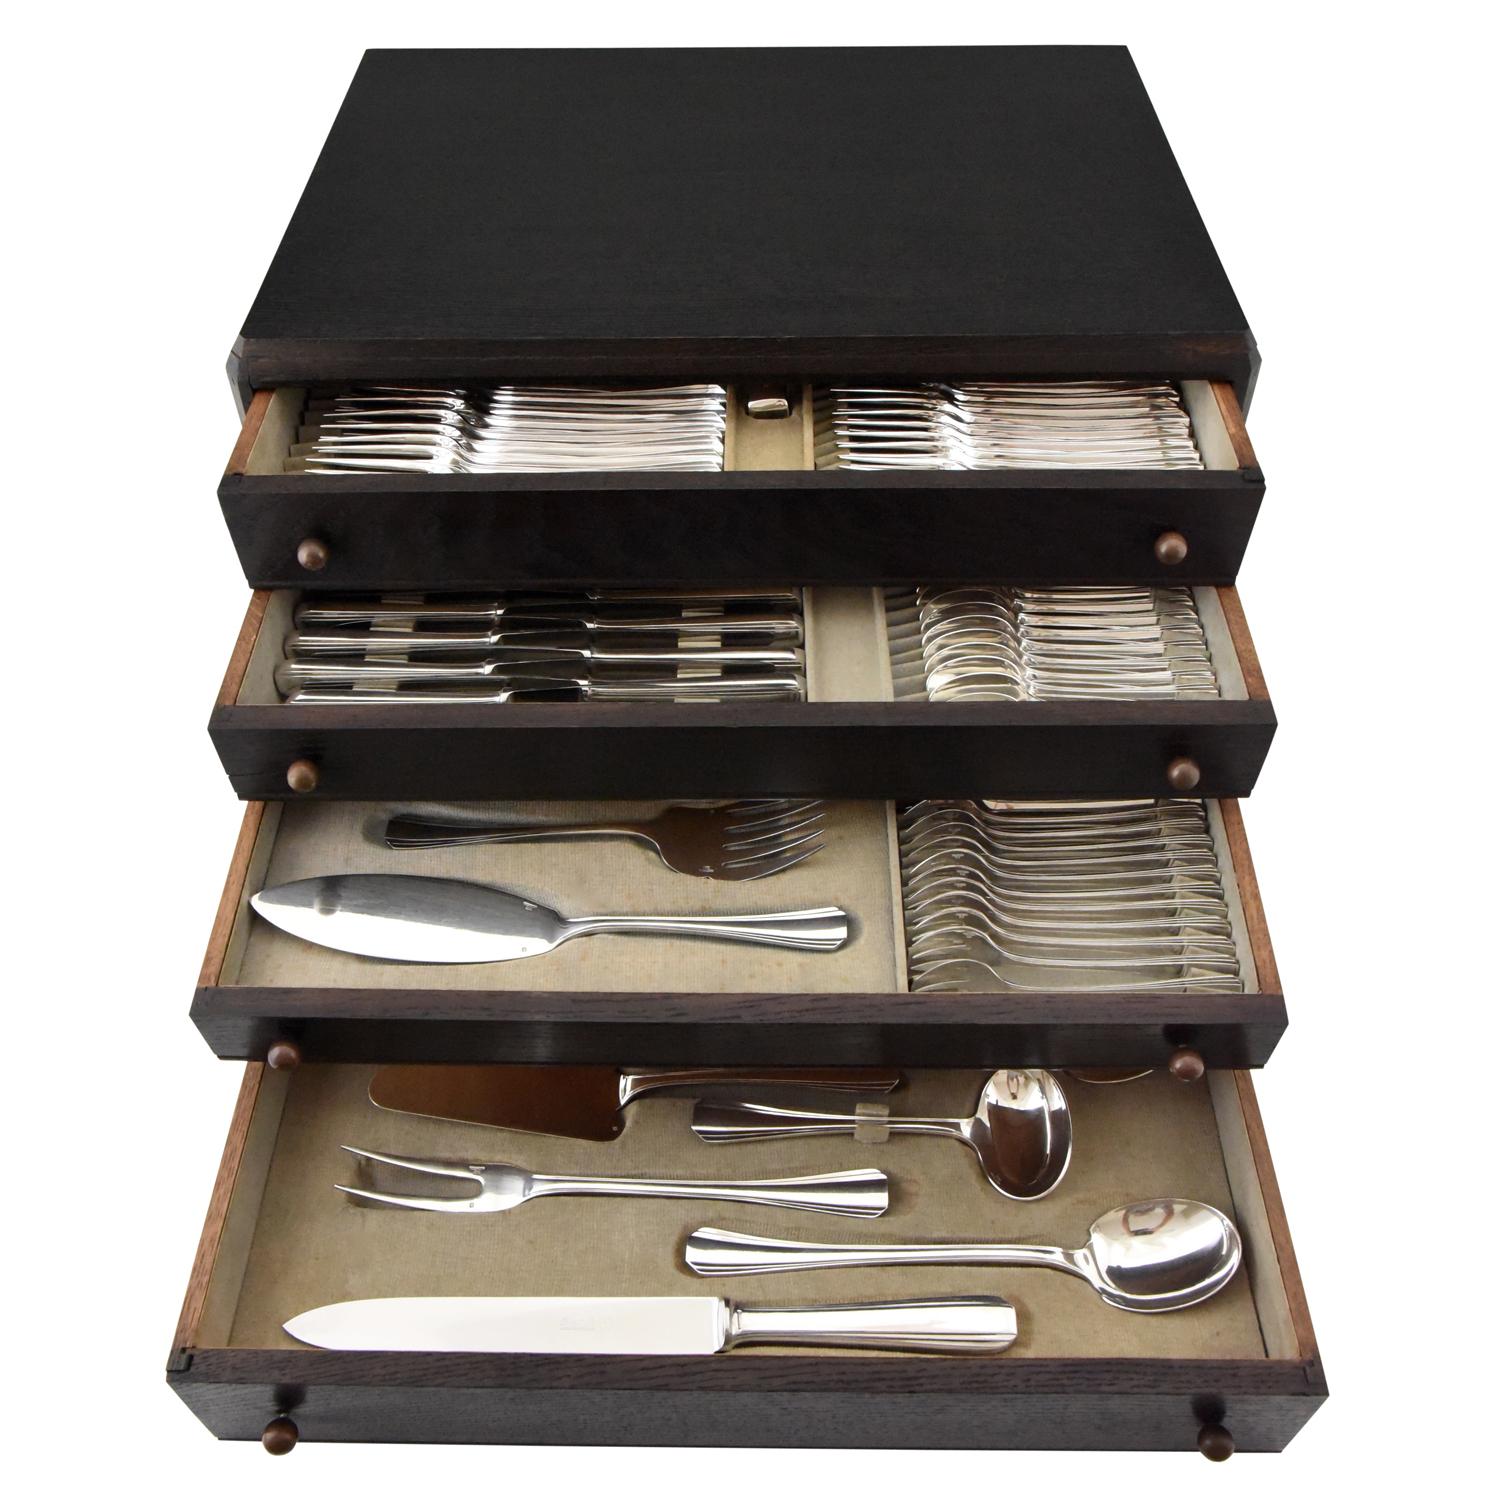 Boreal extensive Art Deco silver plated flatware set for 12 people.
Designed by Luc Lanel for Christofle in 1929.
144 pieces.
11 x 12 = 132
12 serving utensils
The set is contained in the original wooden chest of 4 drawers.
Christofle